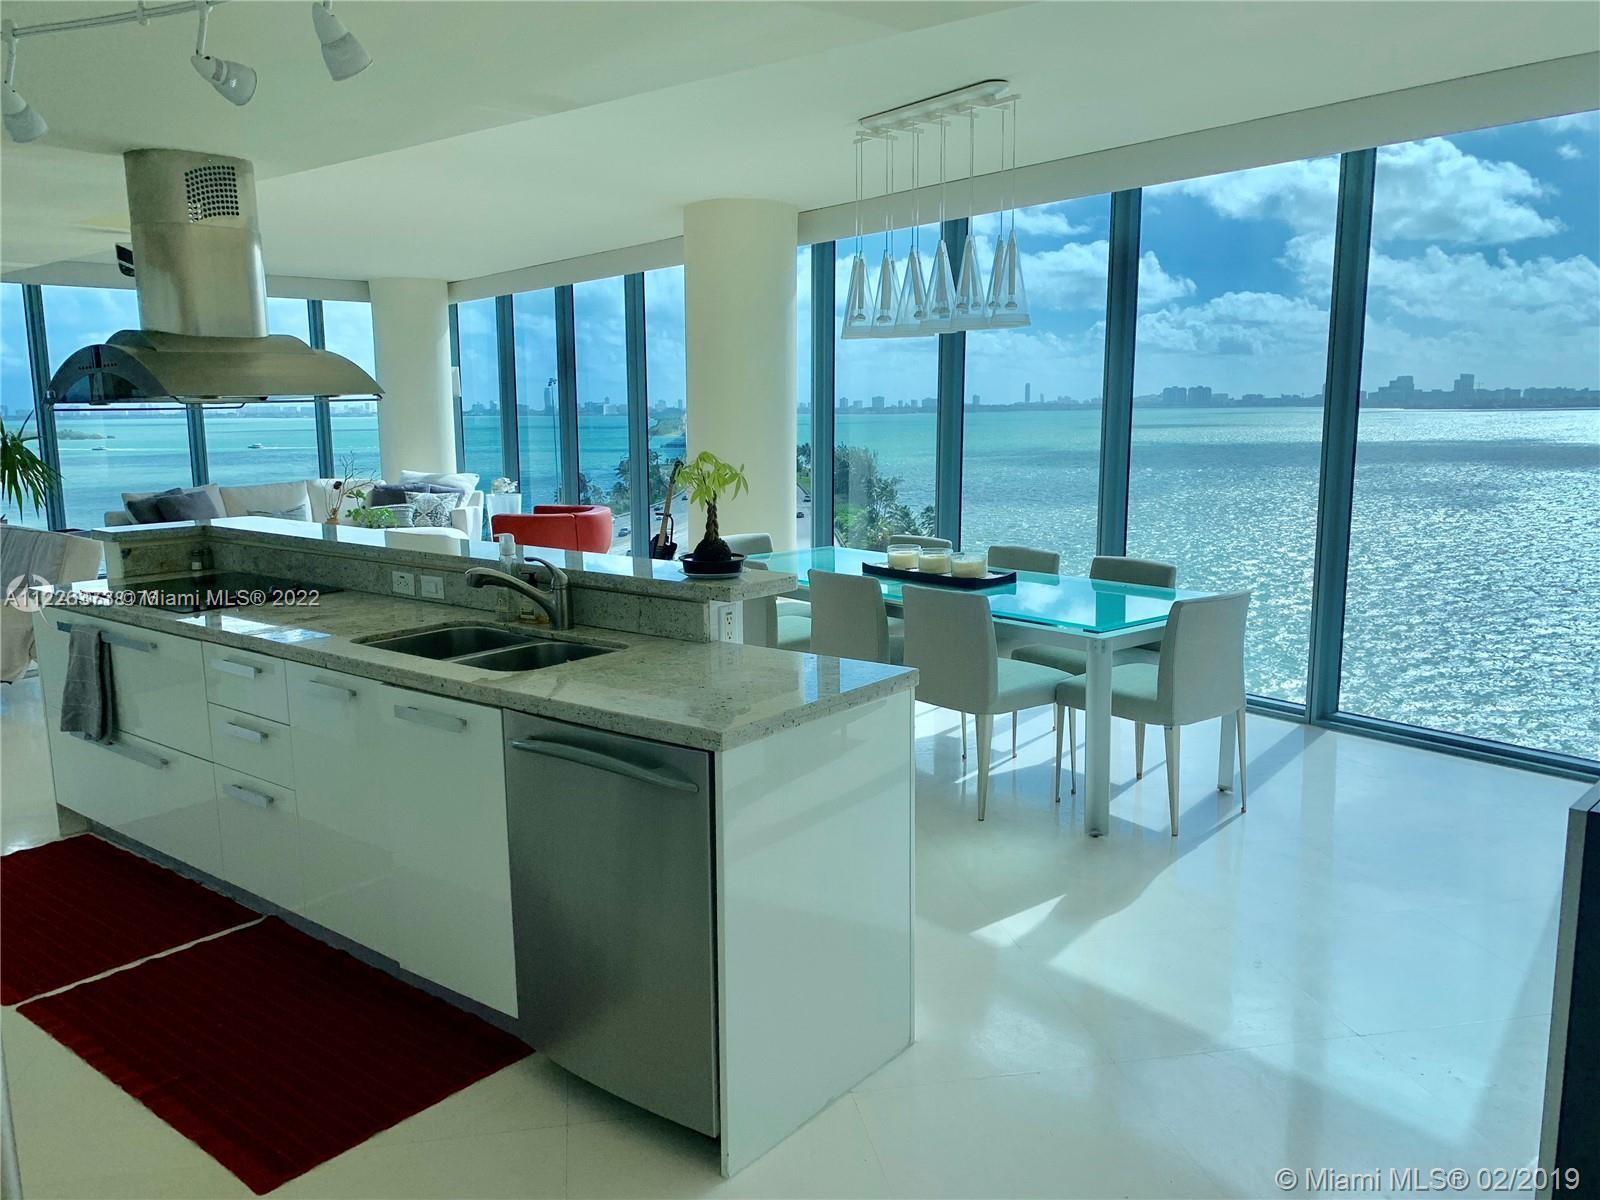 Loaded with Luxury this Waterfront Dreamhouse sits on the 9th floor overlooking expansive Bay views.